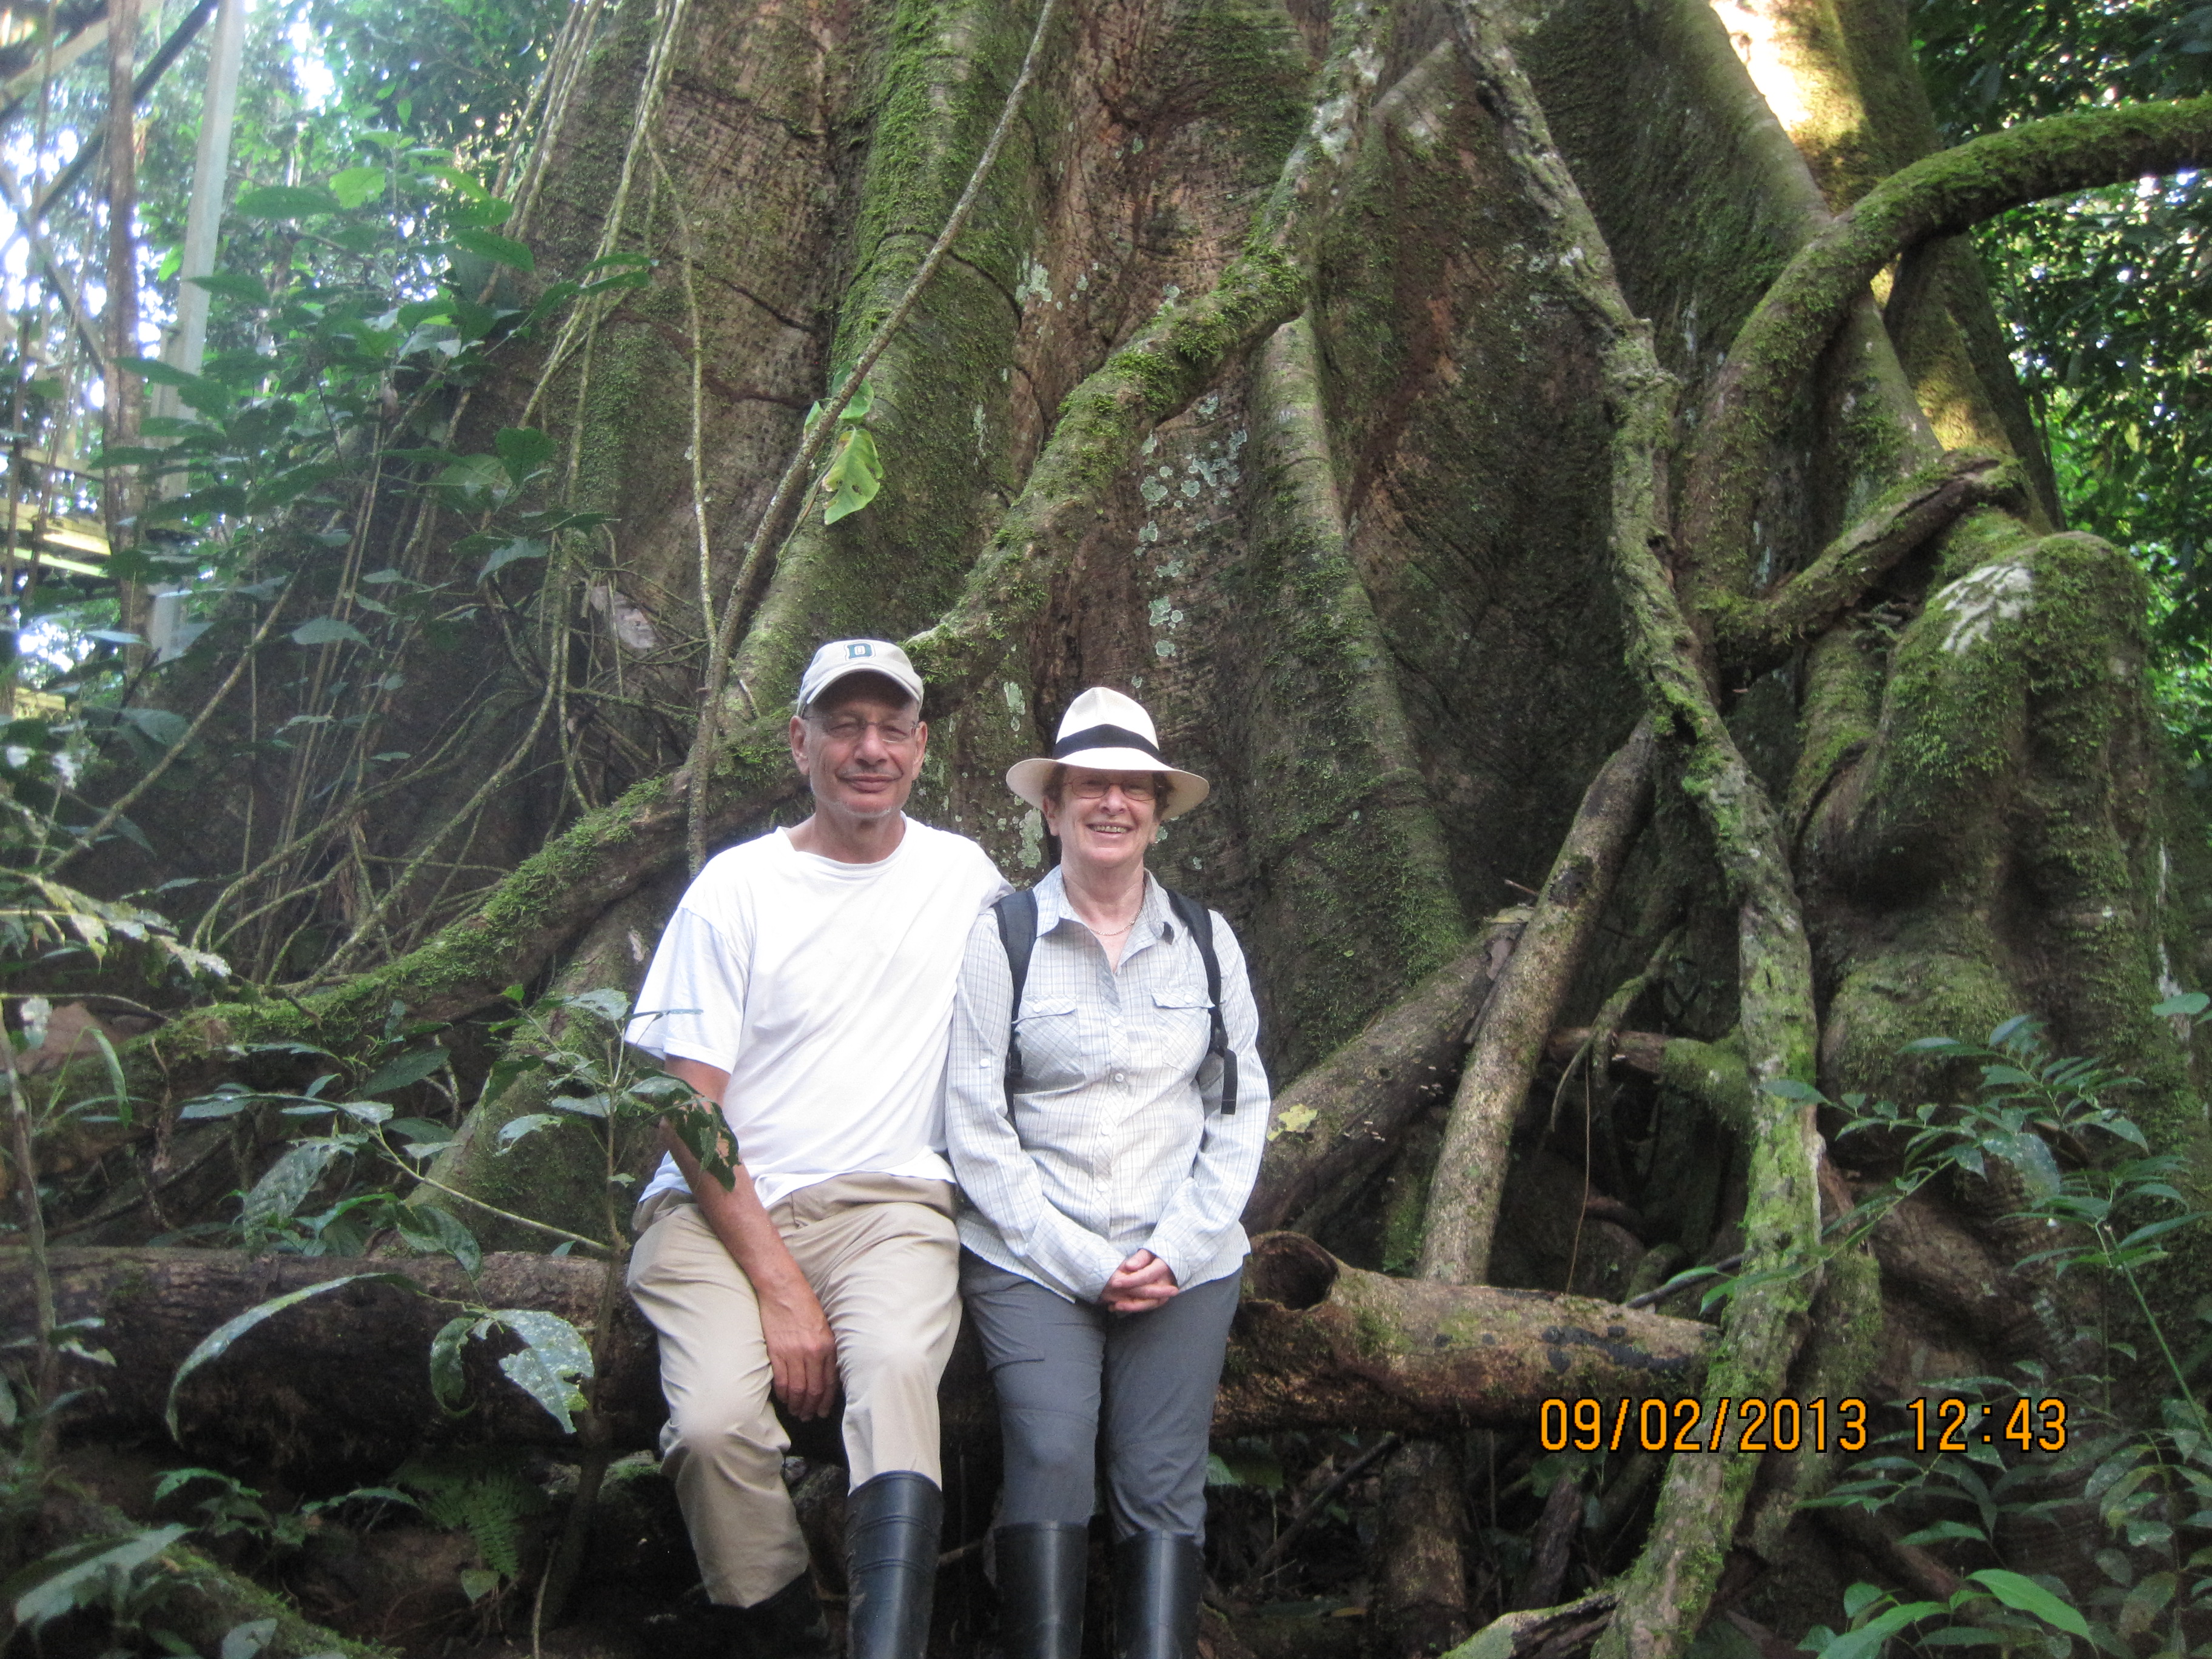 Ned and Wife Carol at the Amazon basin in Ecuador